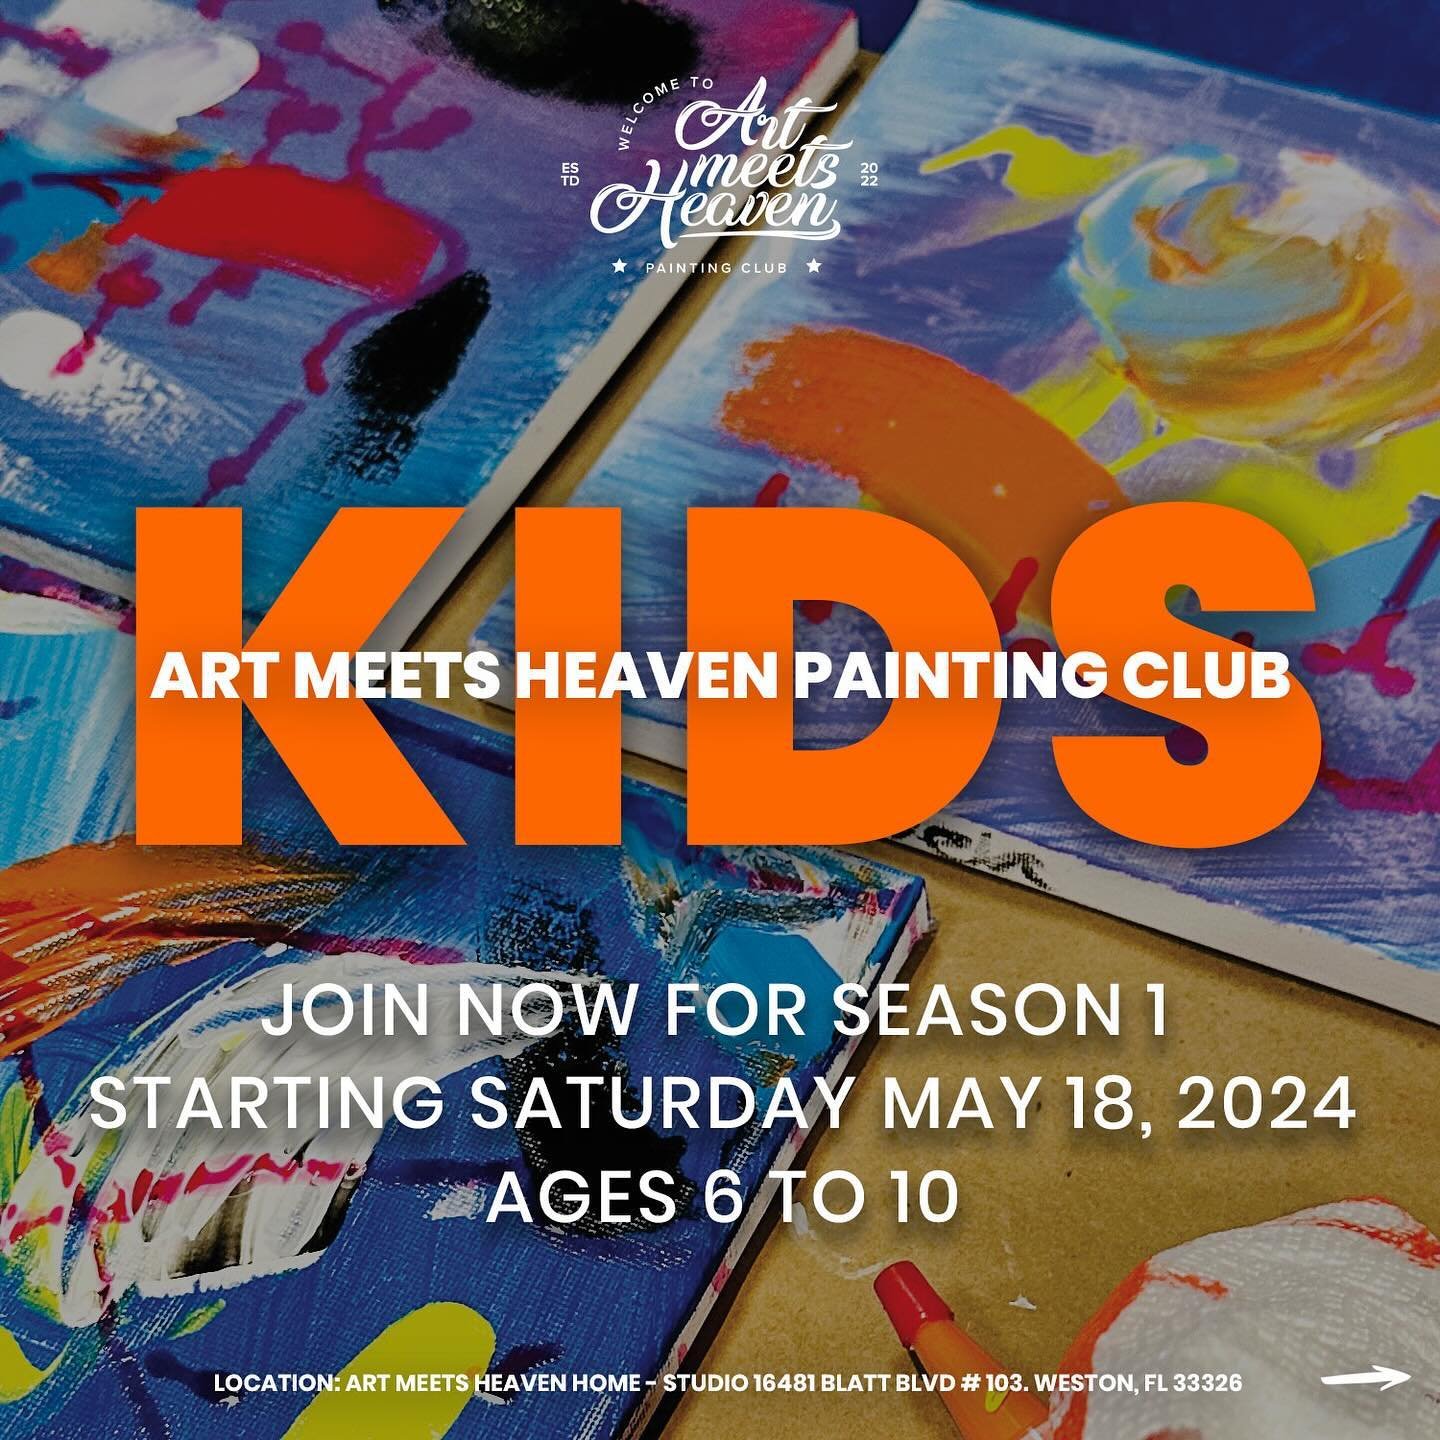 🚨Registration is now OPEN. Art Meets Heaven KIDS PAINTING CLUB 🚨
.
🚨Let your kids create freely in a set up where authenticity and spontaneity lead the creative process🚨
.
🔸Season 1 Starting May 18, 2024
🔹Time: 10:00 am - 11:30 am
🔸4 consecuti